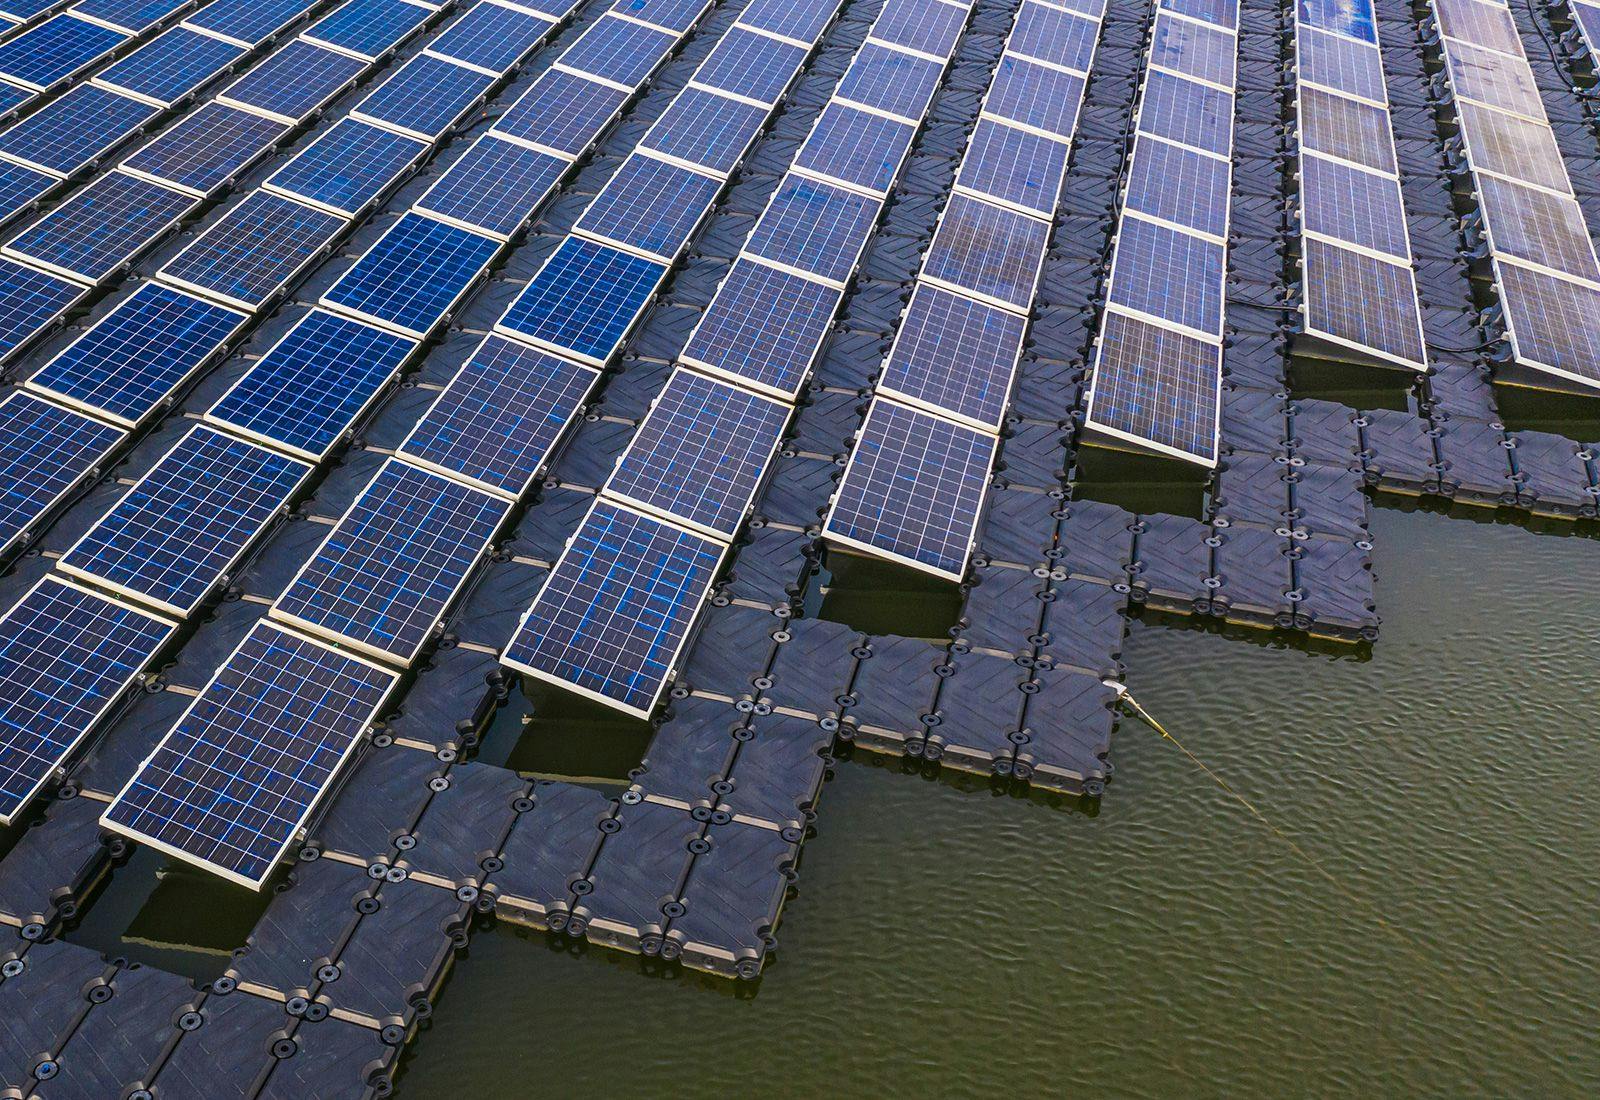 Floating photovoltaics - A renewable option for otherwise unused water areas